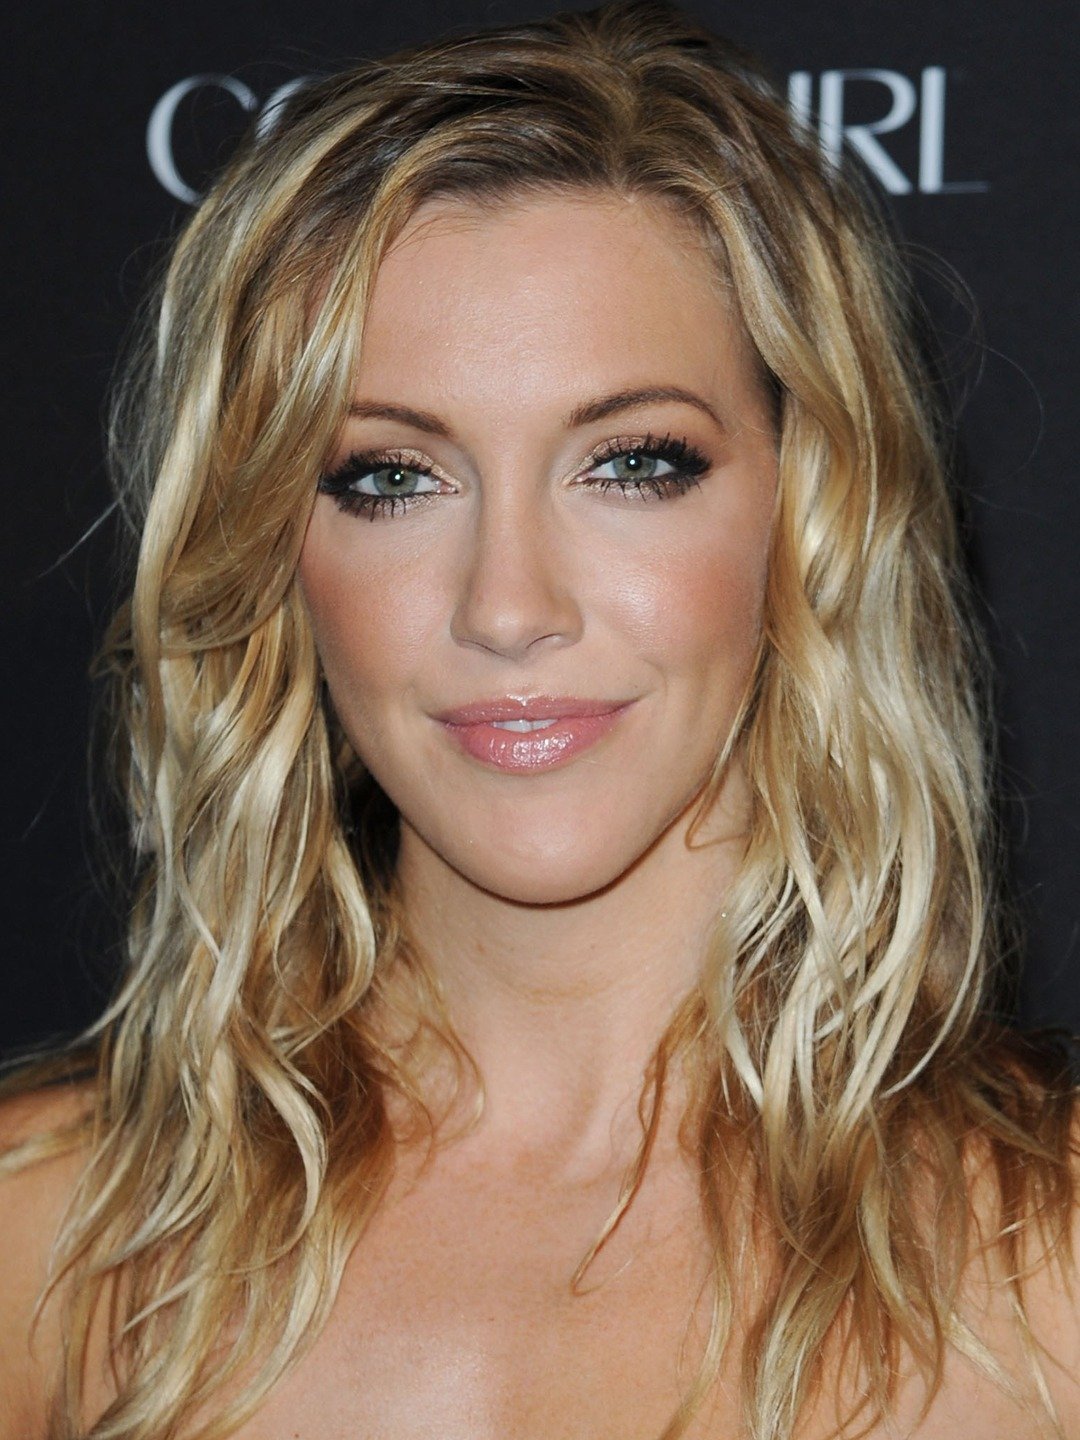 How tall is Katie Cassidy?